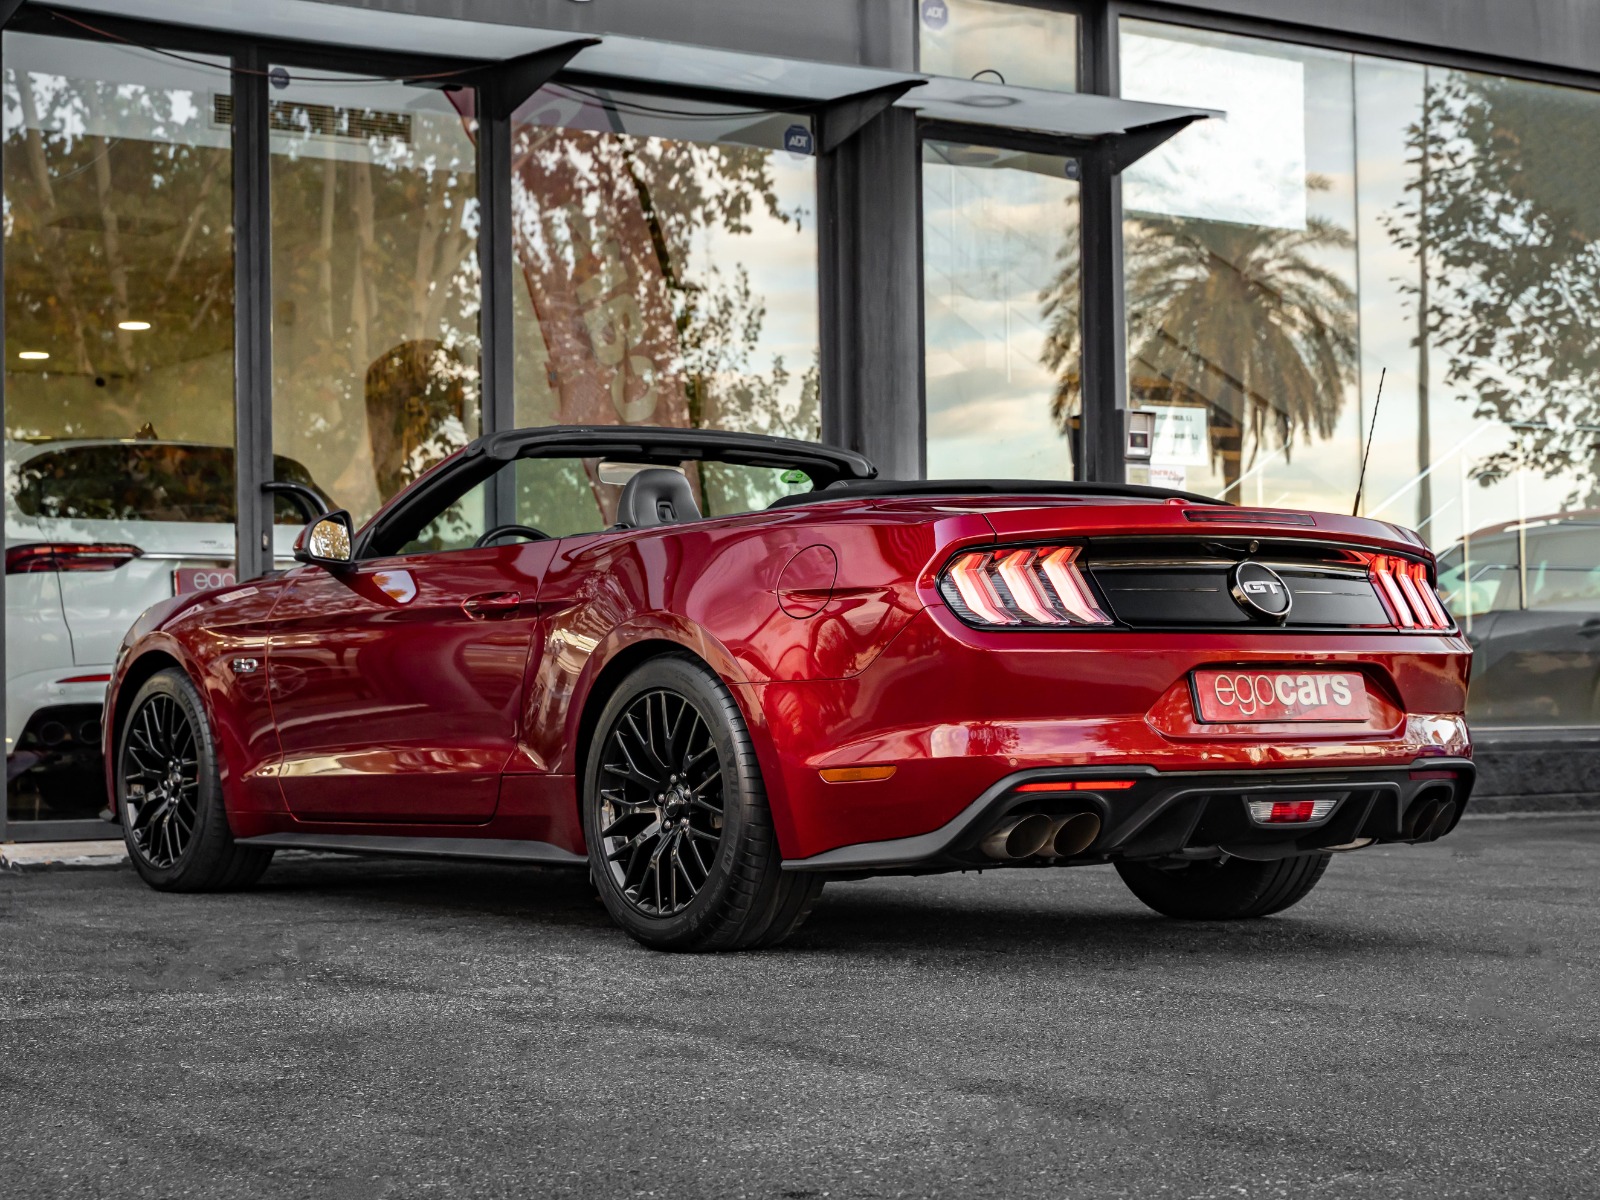 FORD MUSTANG GT CONVERTIBLE - EGOCARS (3)